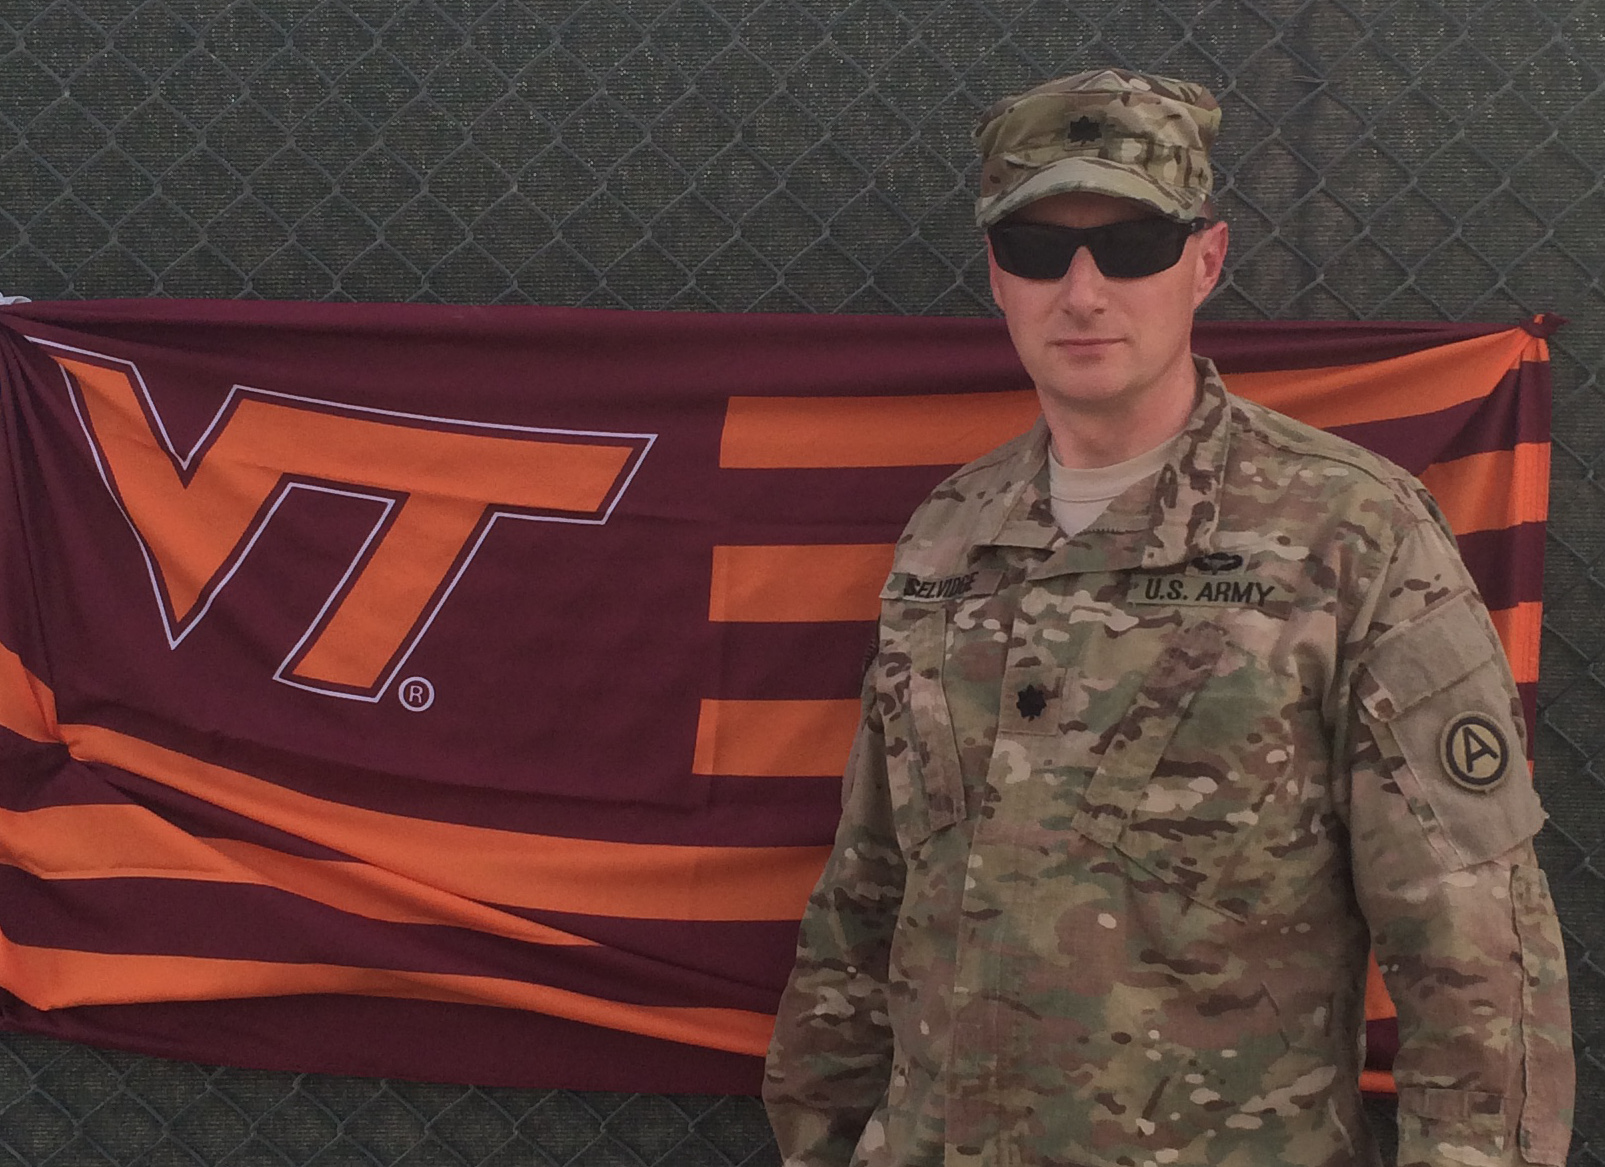 Lt. Col. Roy Selvidge, U.S. Army, Virginia Tech Corps of Cadets Class of 1993 standing in front of a VT flag.